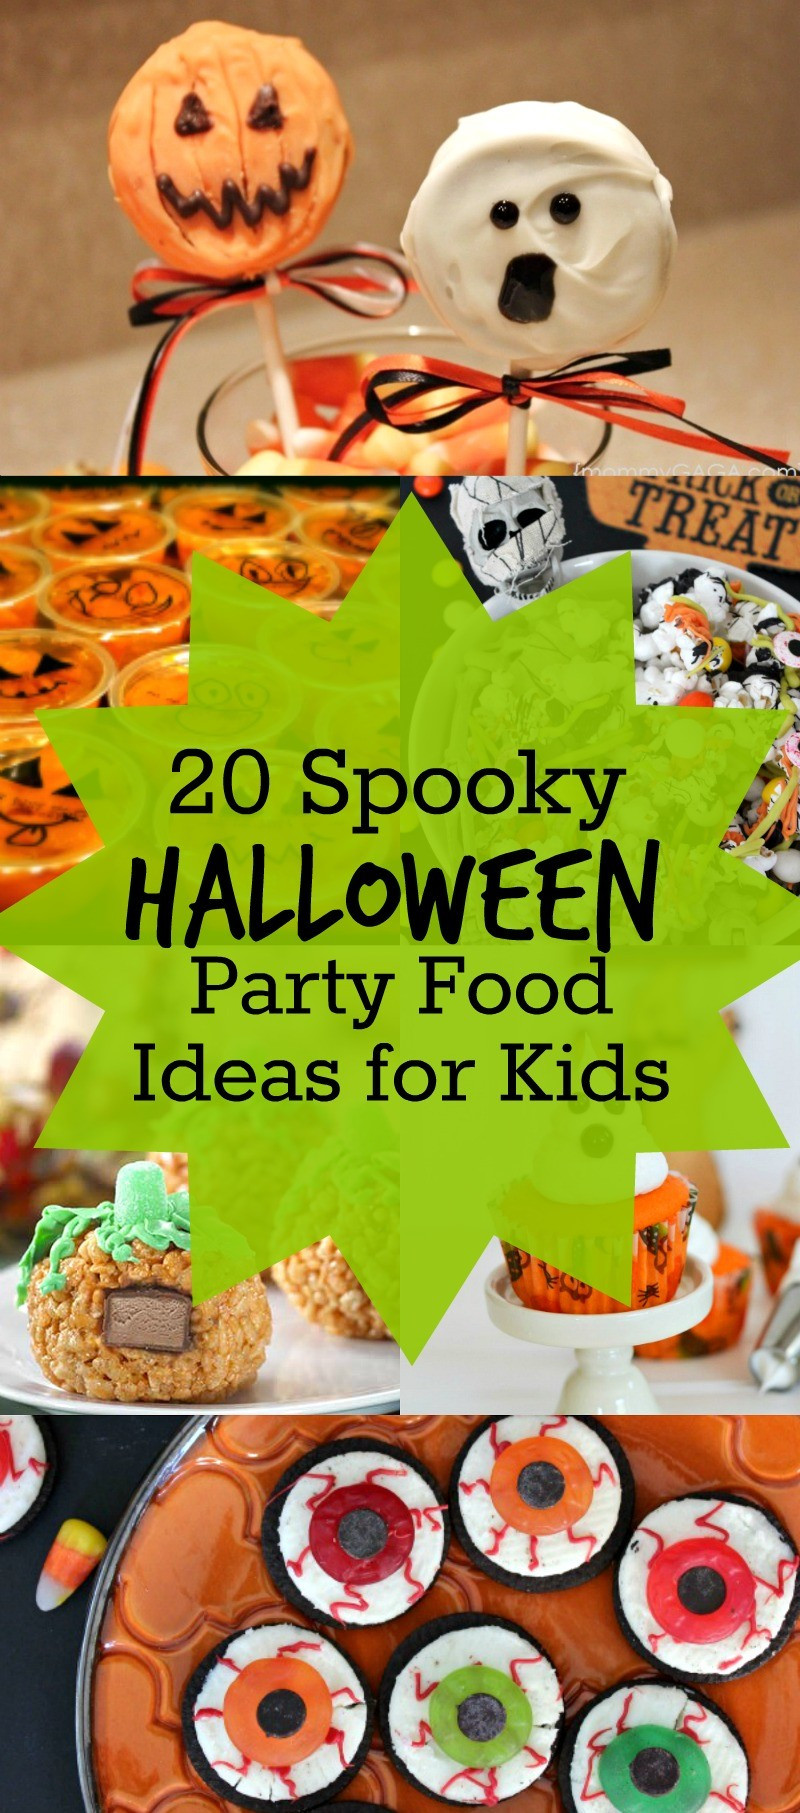 Cute Halloween Food Ideas For Party
 20 Spooky Halloween Party Food Ideas for Kids Such cute